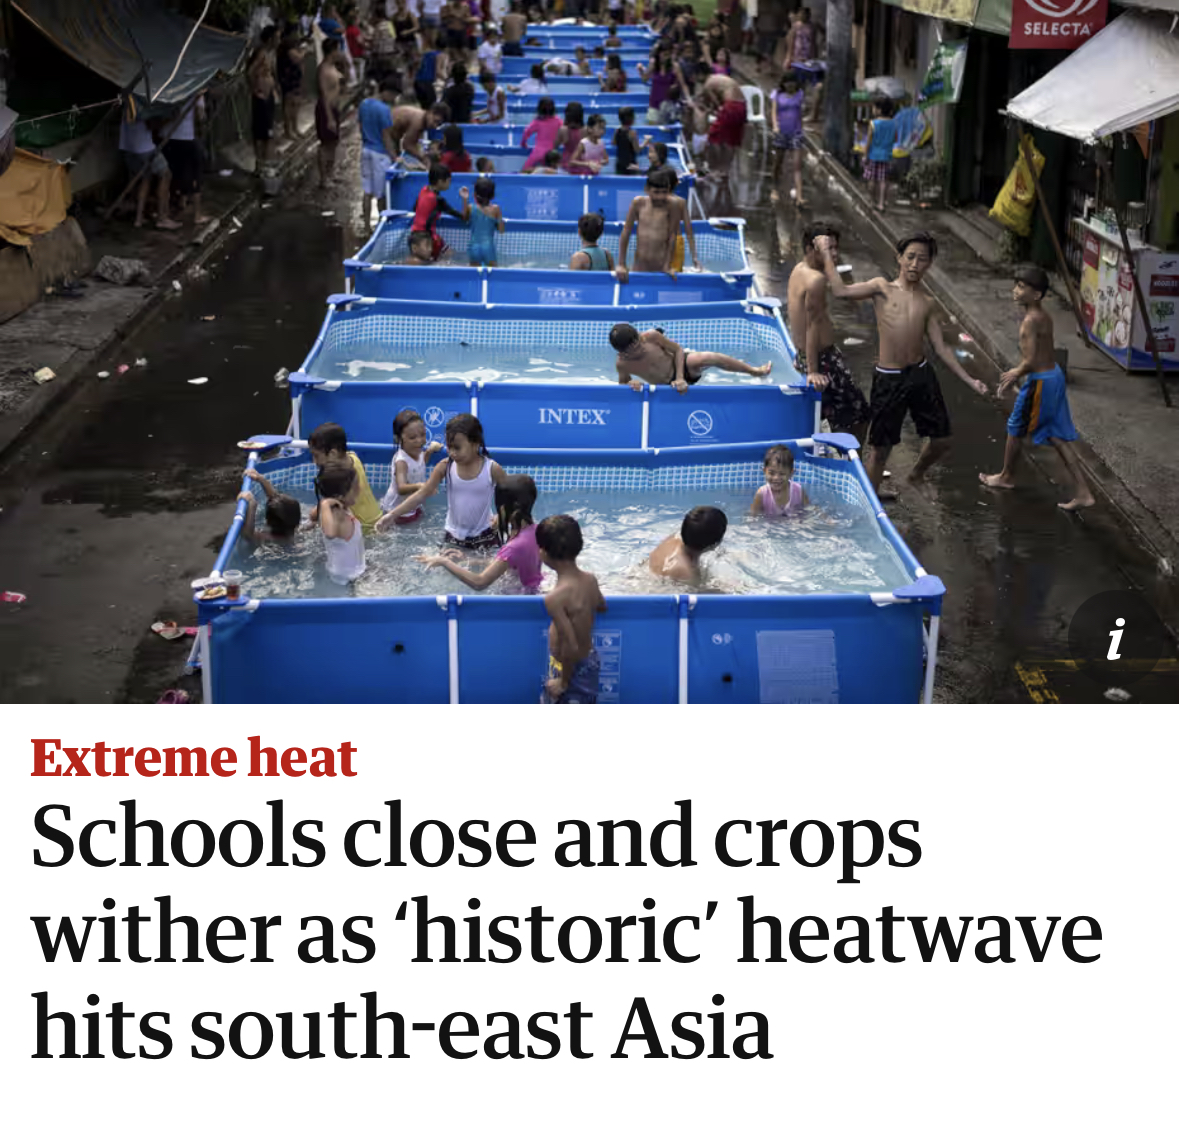 Thousands of schools across south-east Asia are closing down due to unbearable heat. While our politicians dither and delay, young people in climate-impacted areas are bearing the consequences. @RishiSunak needs to take responsibility, starting with an end to new oil and gas.